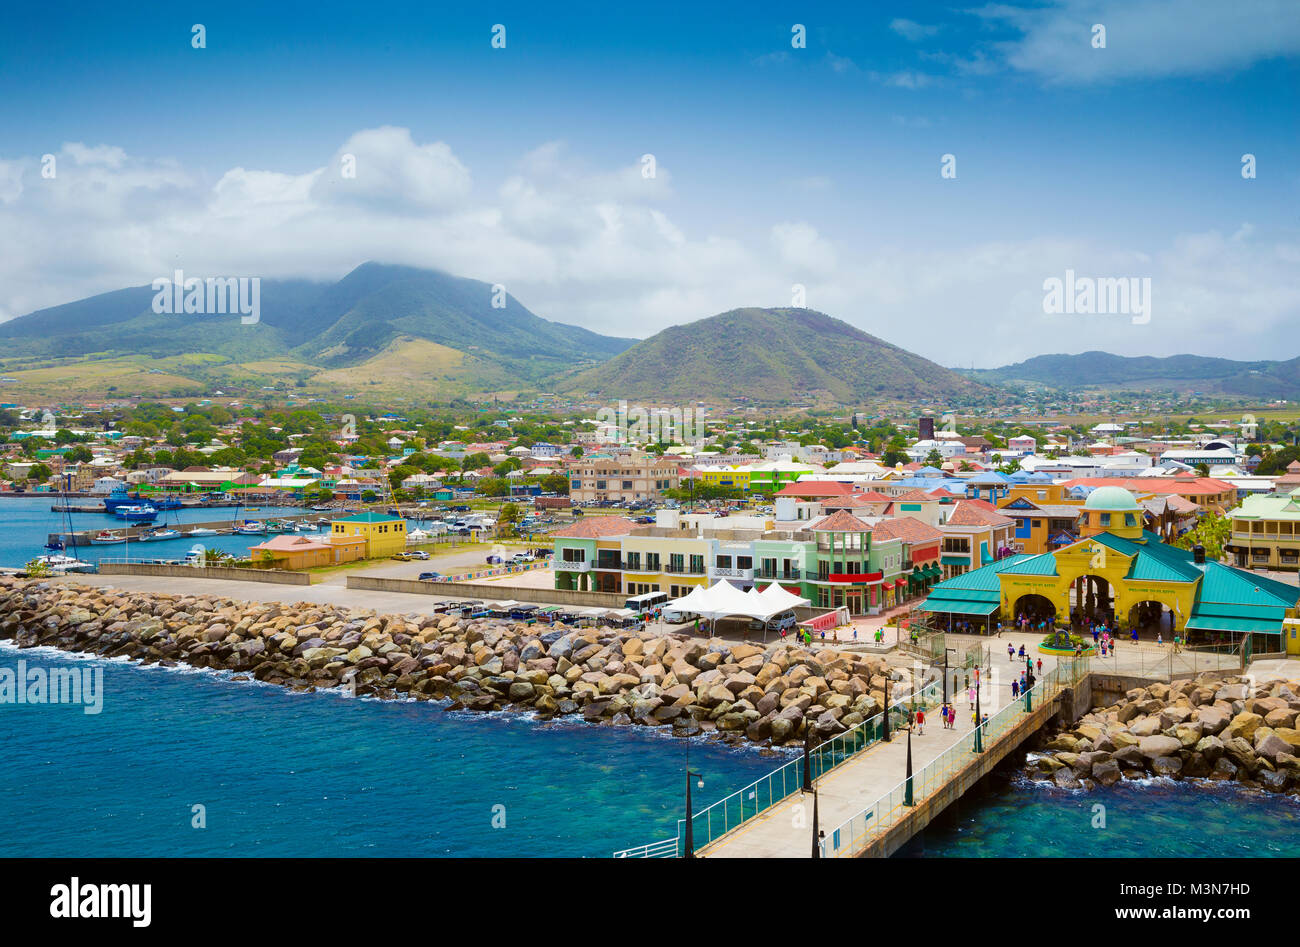 Port Zante in Basseterre town, St. Kitts And Nevis Stock Photo